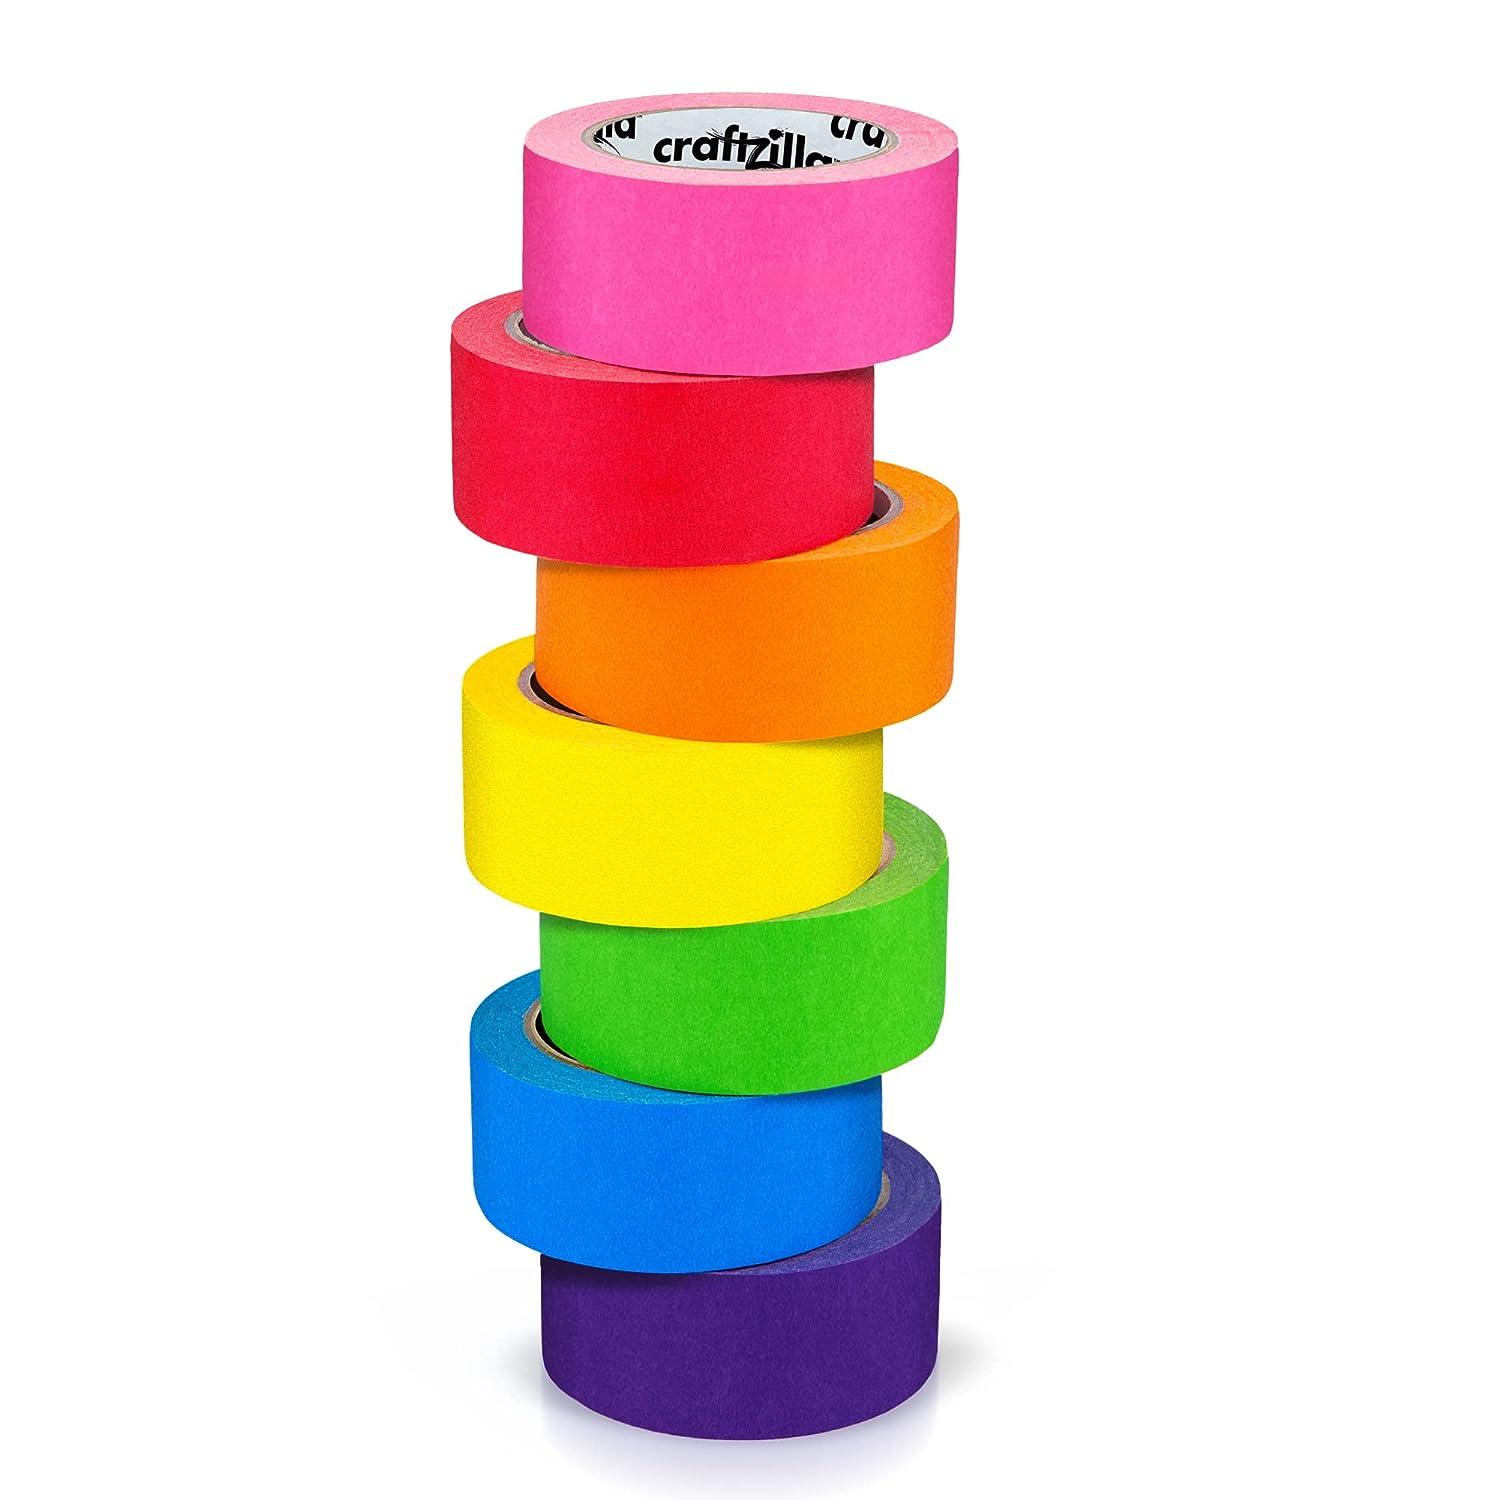 Colorful Masking Tape 16 Yards Each Rainbow Colored Painting